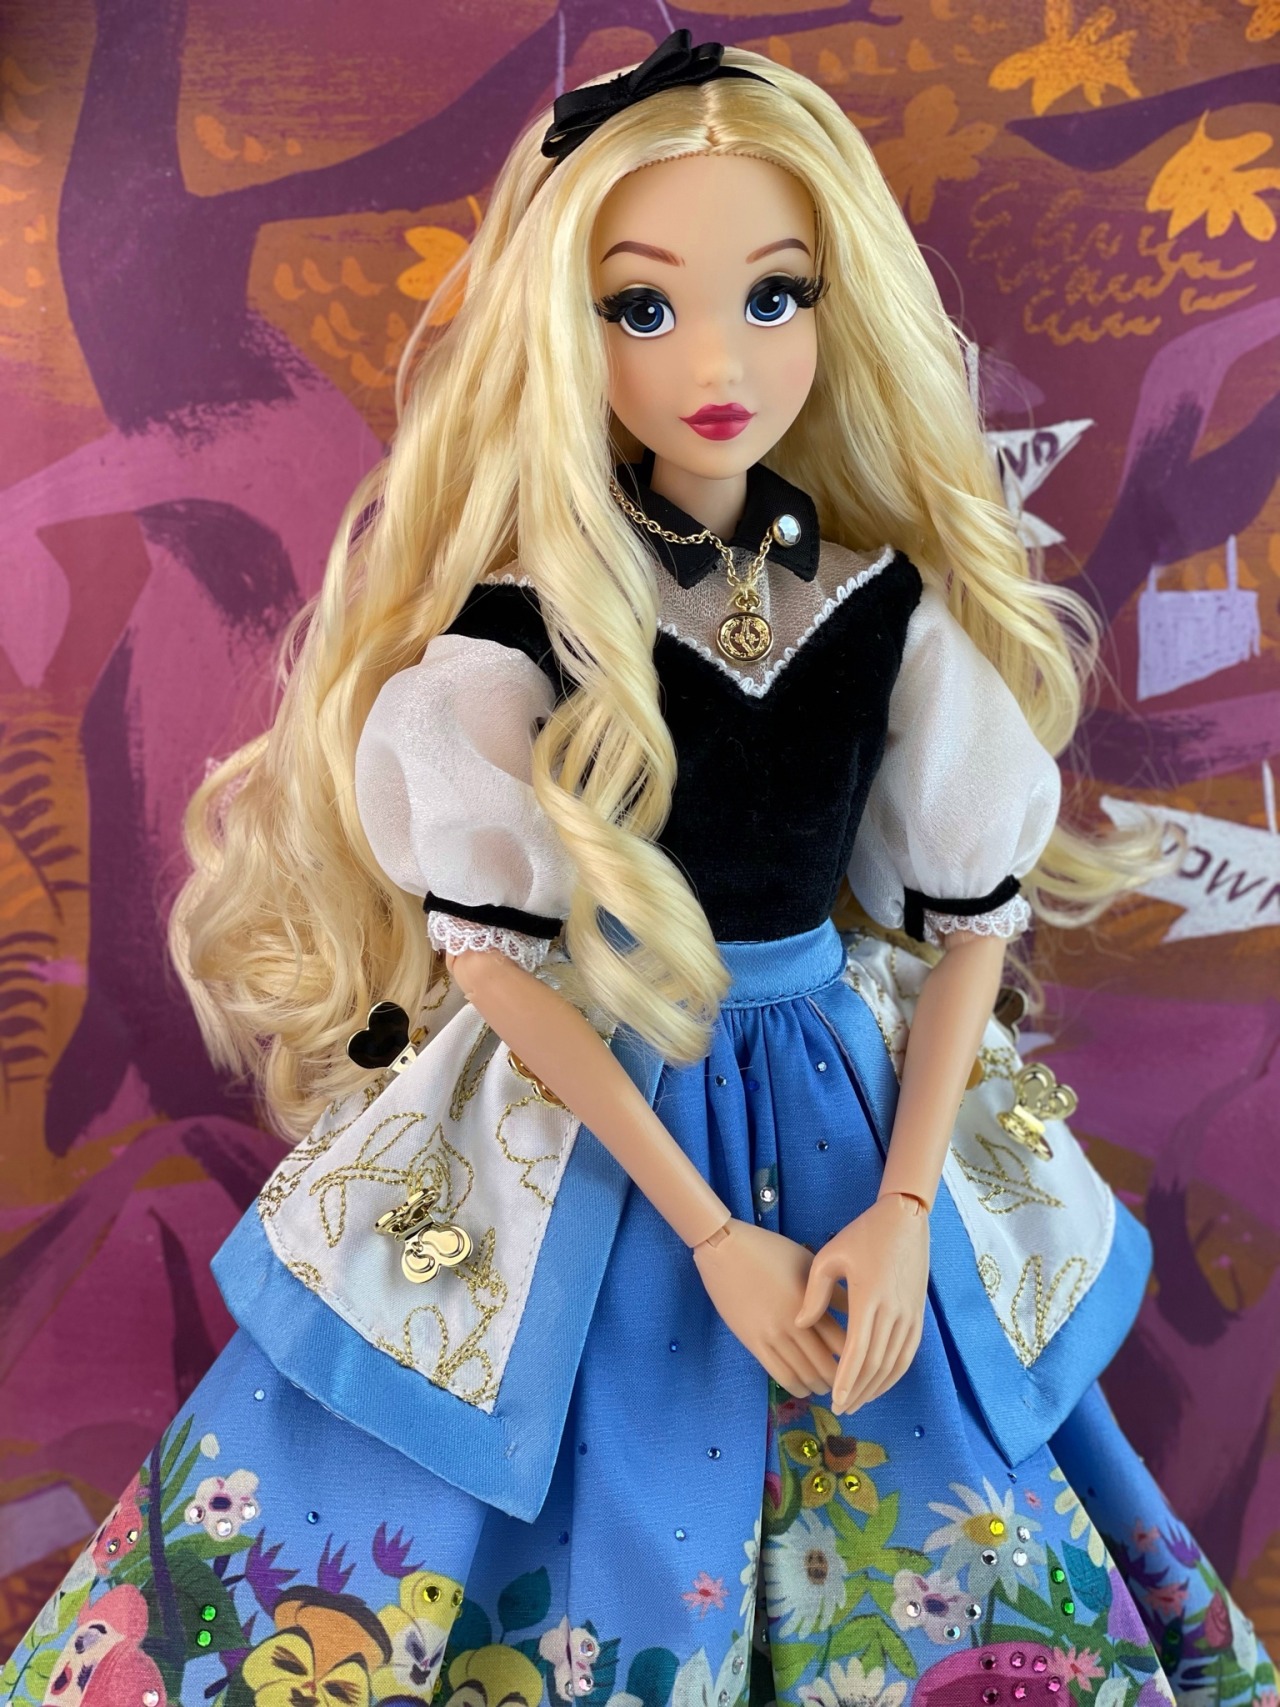 Celebrate 70 Years of Wonderland with a Limited-Edition Mary Blair Alice  Doll - The Toy Insider